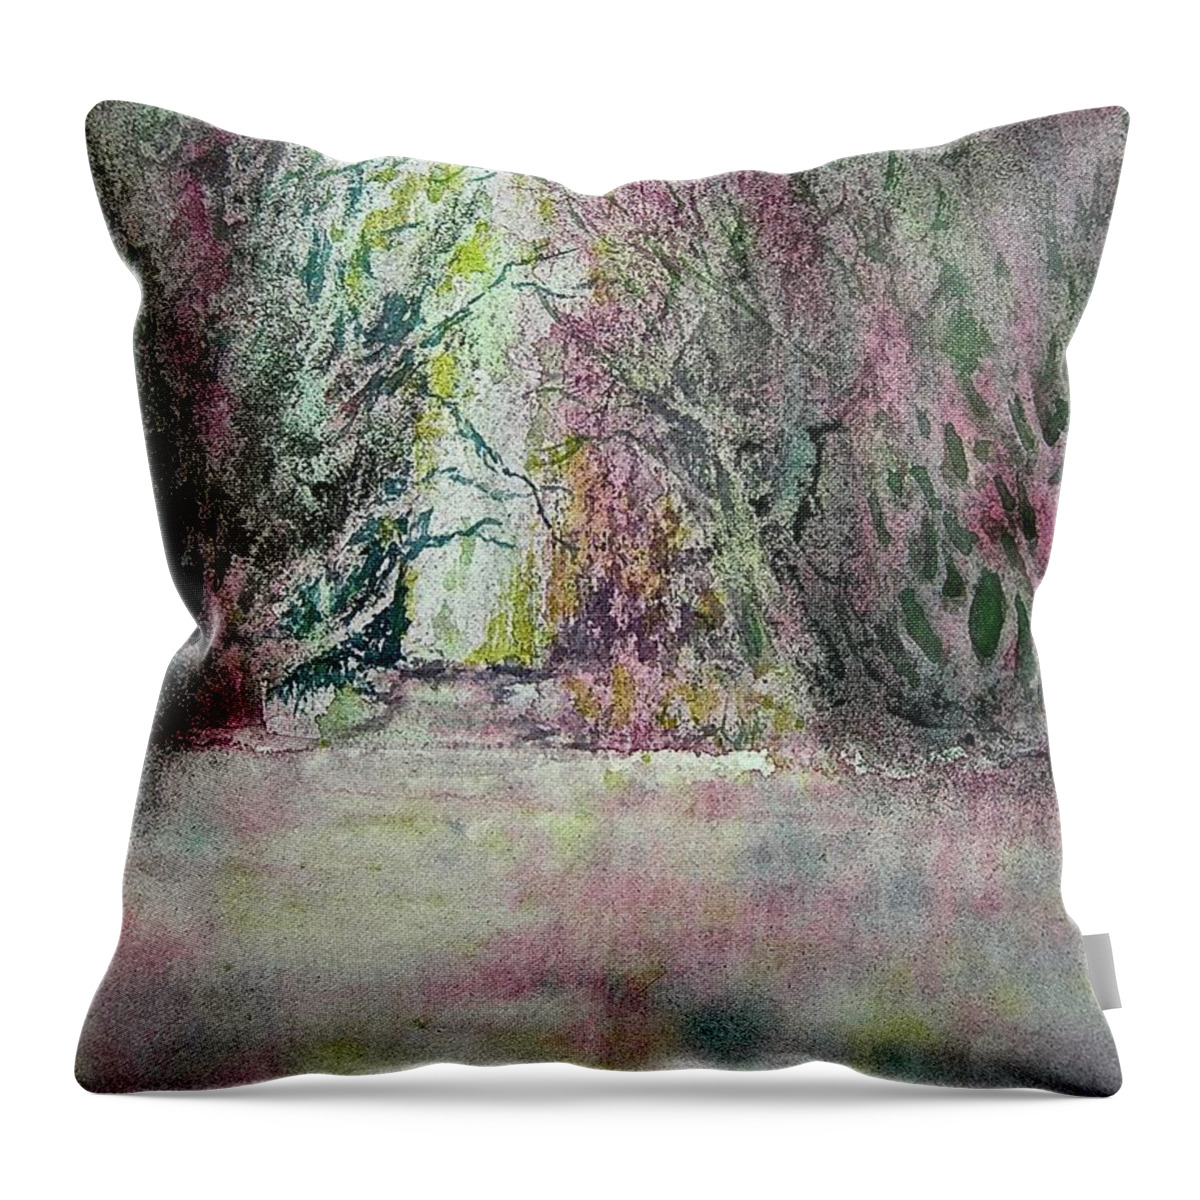 Watercolor Throw Pillow featuring the painting Fantasy Waterfall by Carolyn Rosenberger